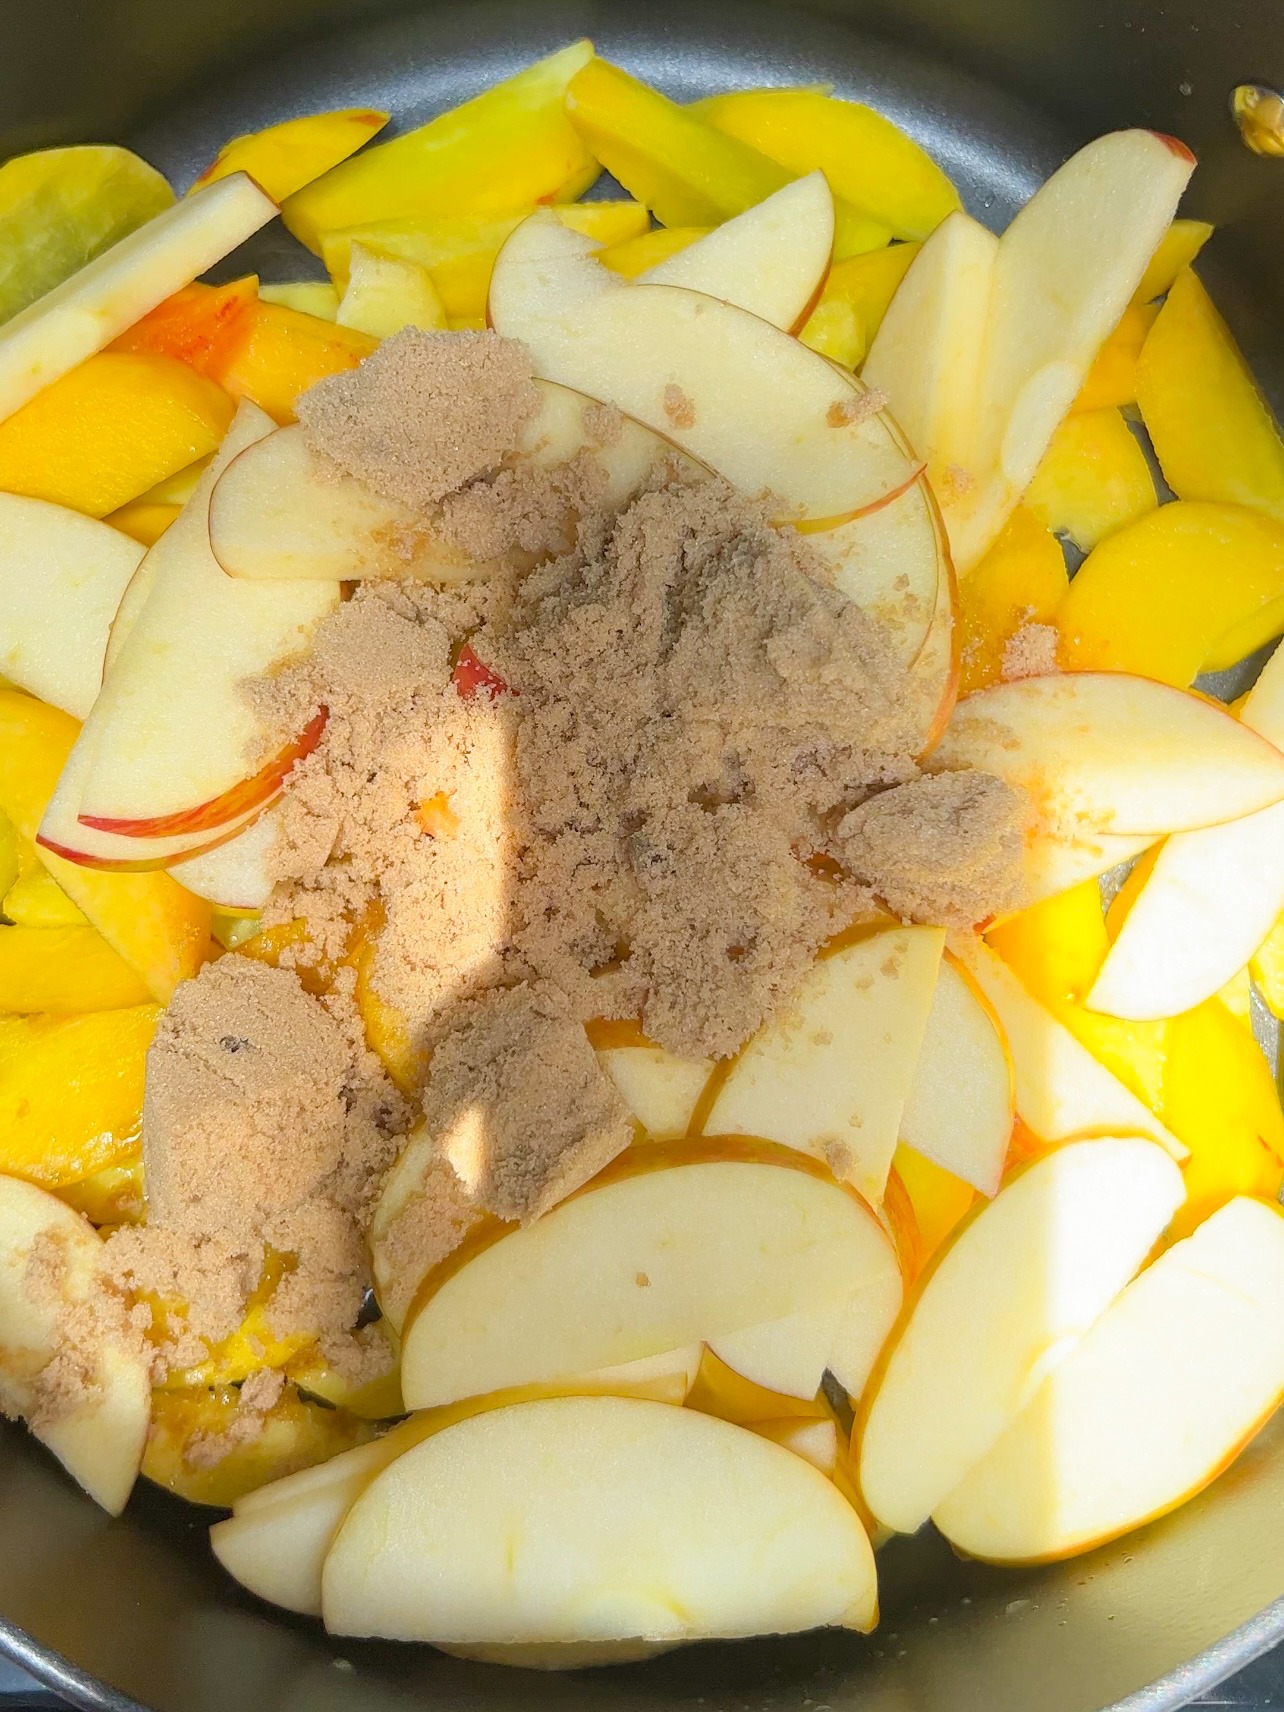 sliced peaches and apples with brown sugar